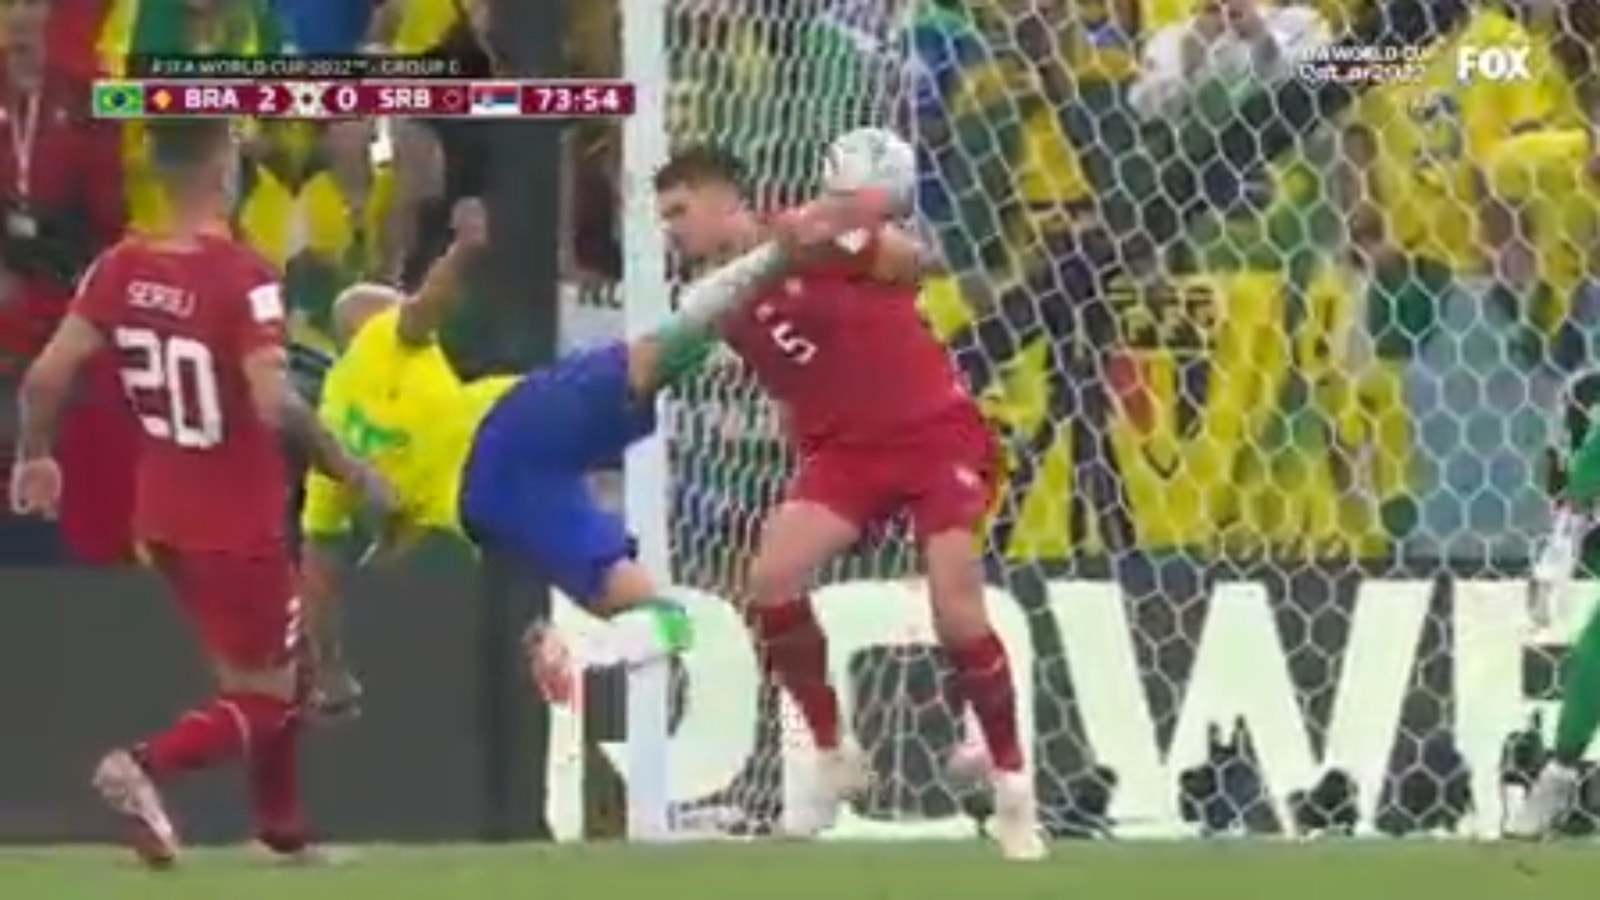 Richarlison gives Brazil a 2-0 lead with an acrobatic goal